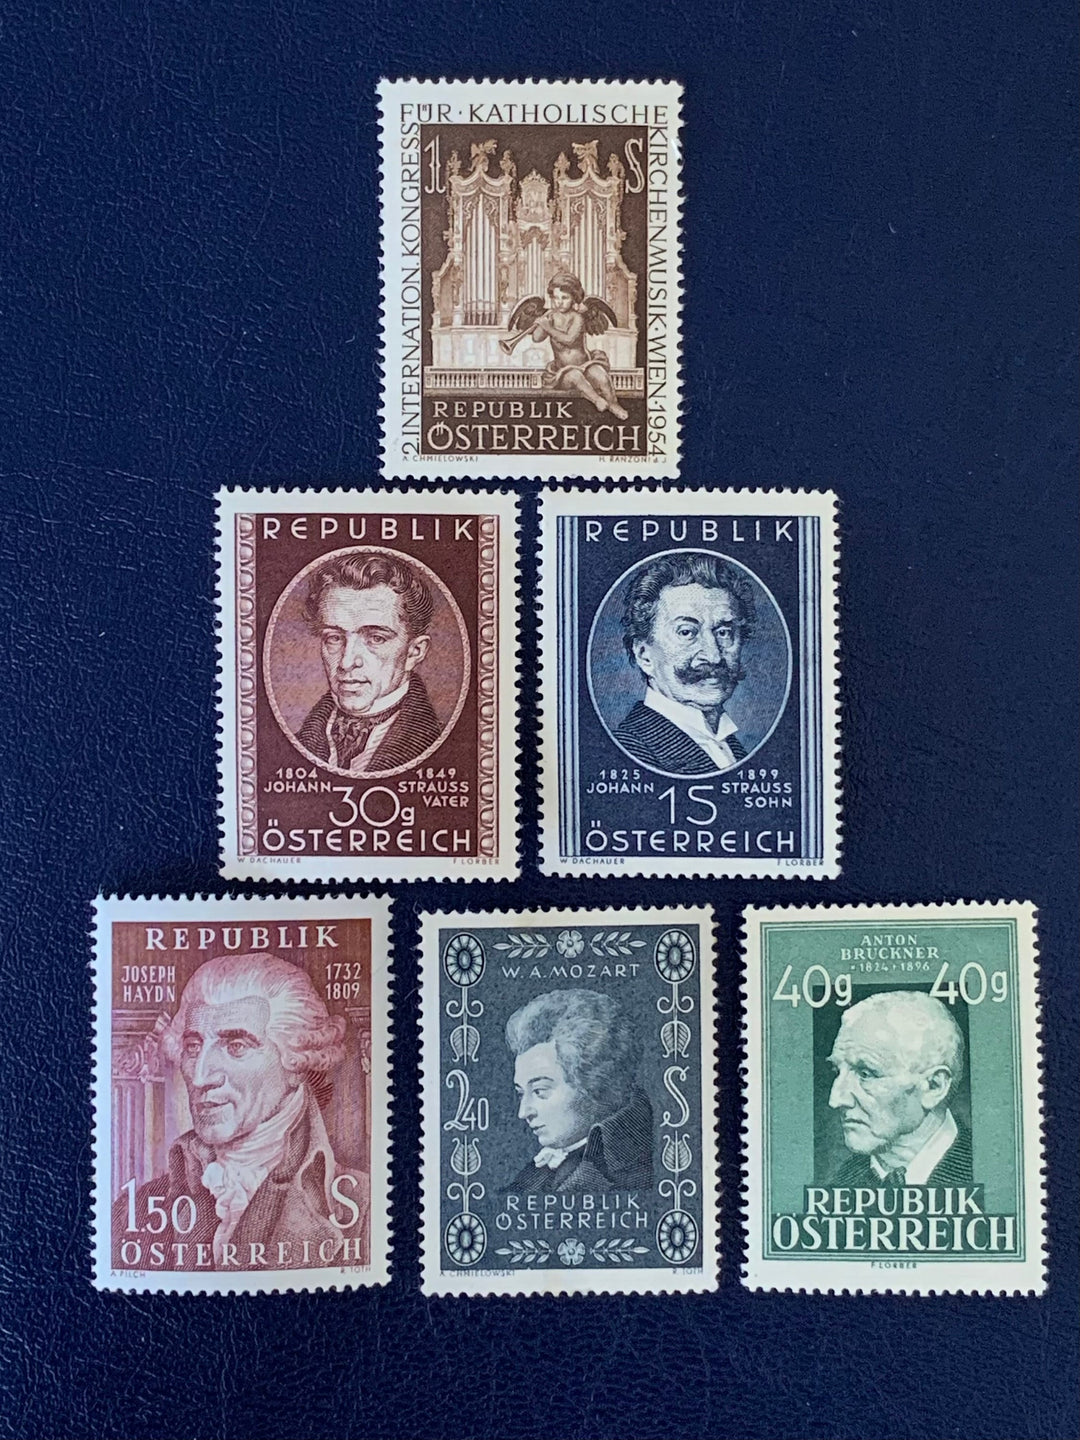 Austria - Original Vintage Postage Stamps - 1949/54/59 - Composers - for the collector, artist or crafter - scrapbooks, decoupage